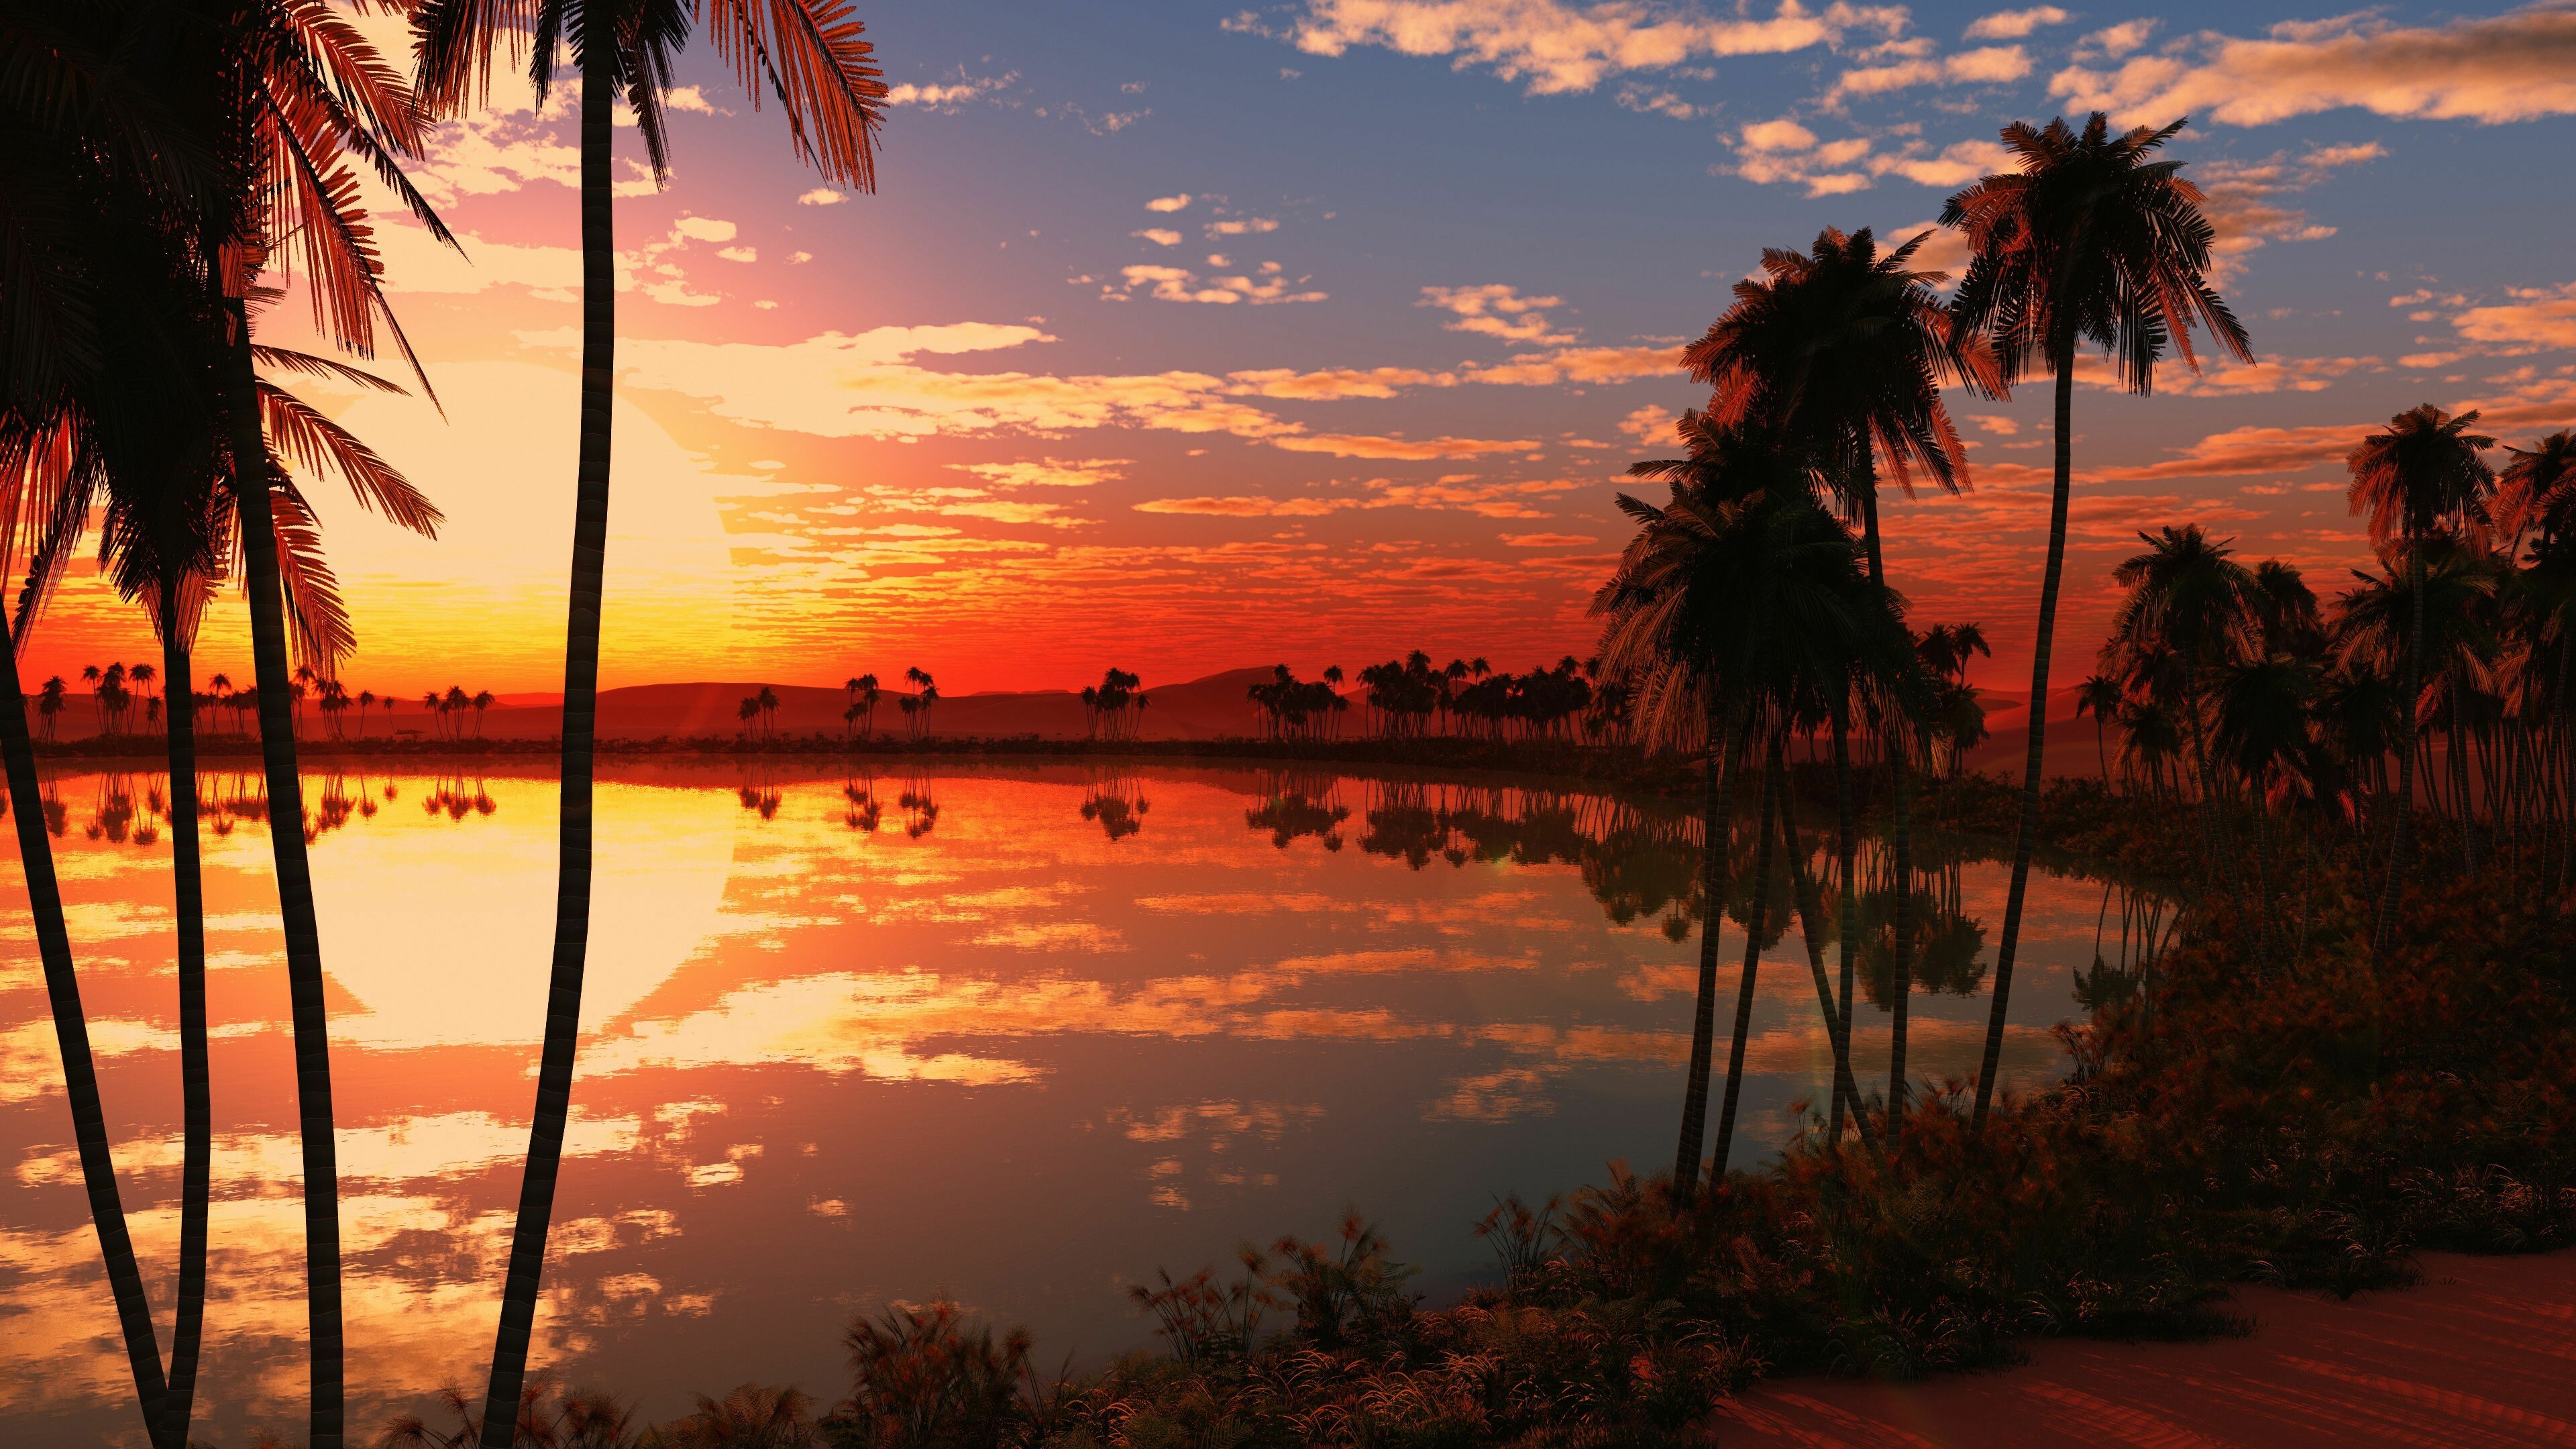 Sunset: The evening twilight, Tropical island, Atmospheric effects. 3840x2160 4K Background.